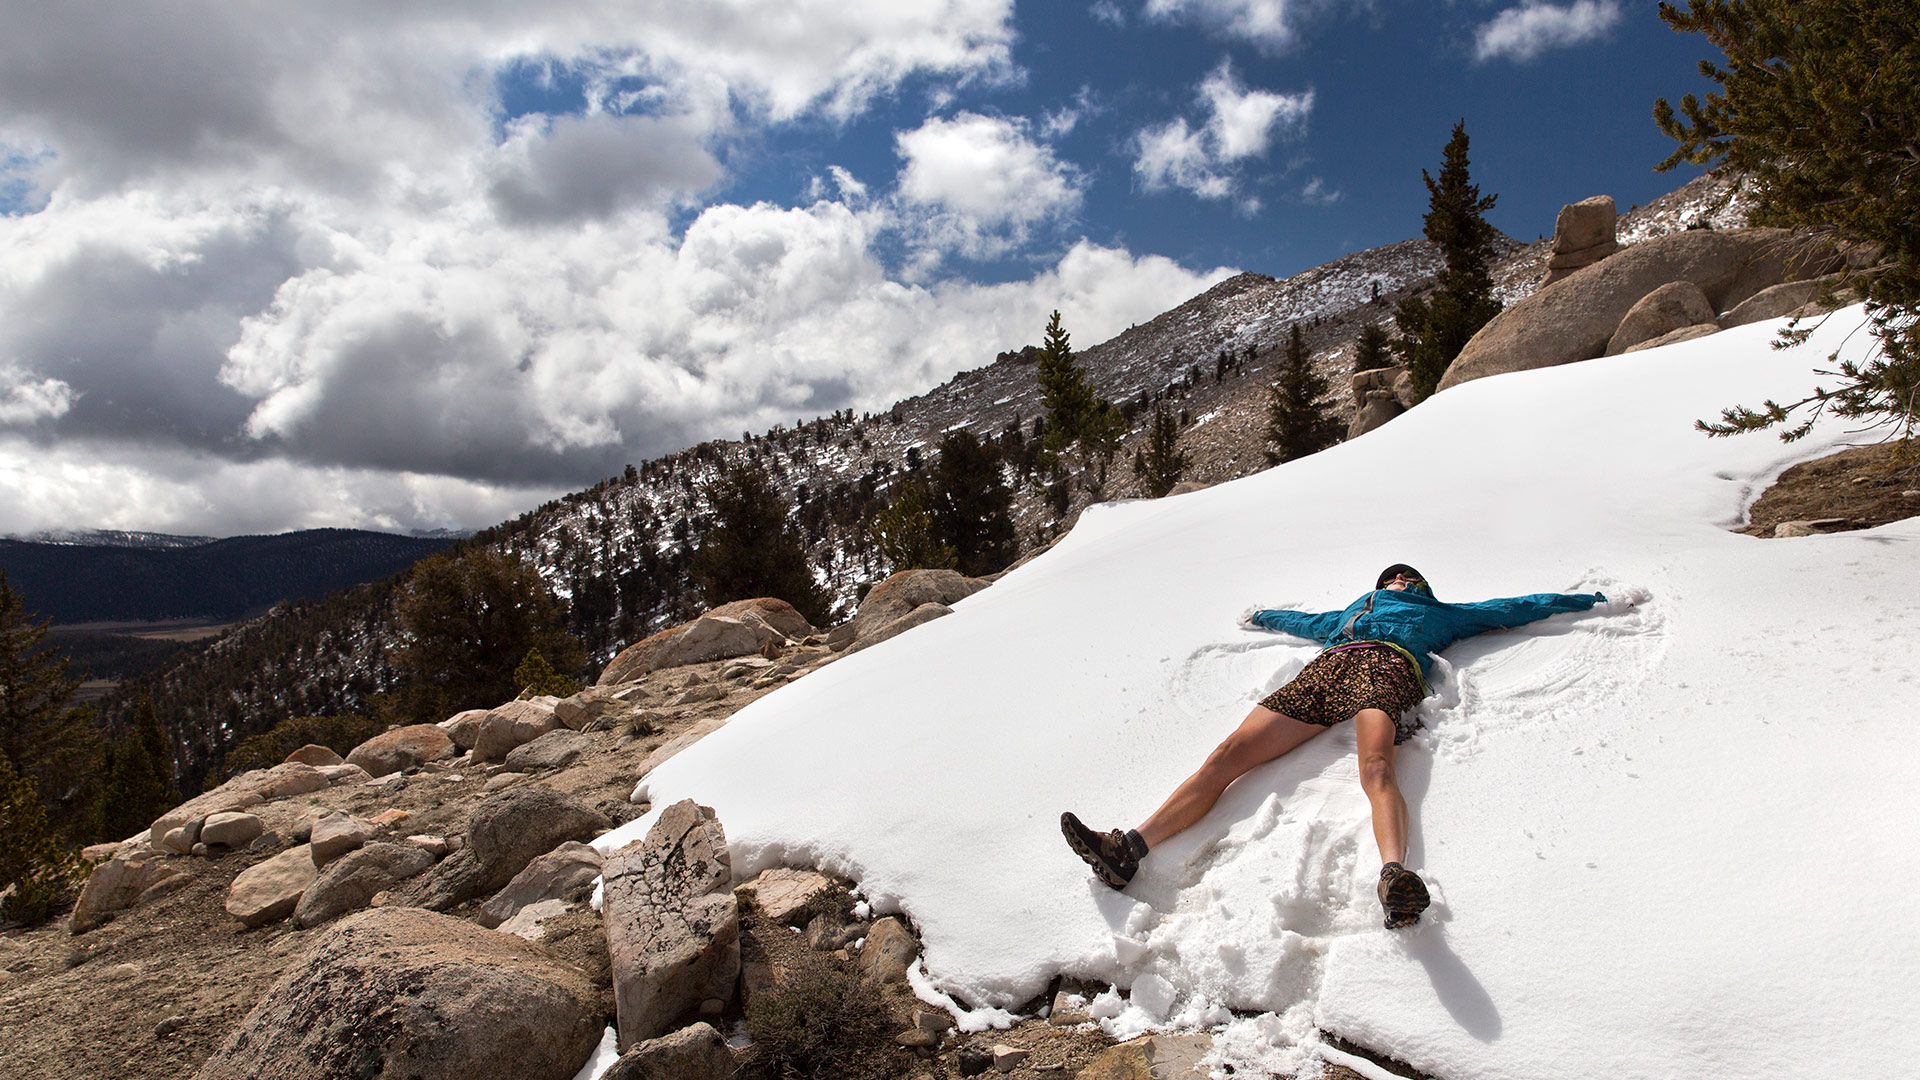 'Dirt Bowl' makes a snow angel in the Sierra on a magical day. Photo by Bri 'Twink' Leahy